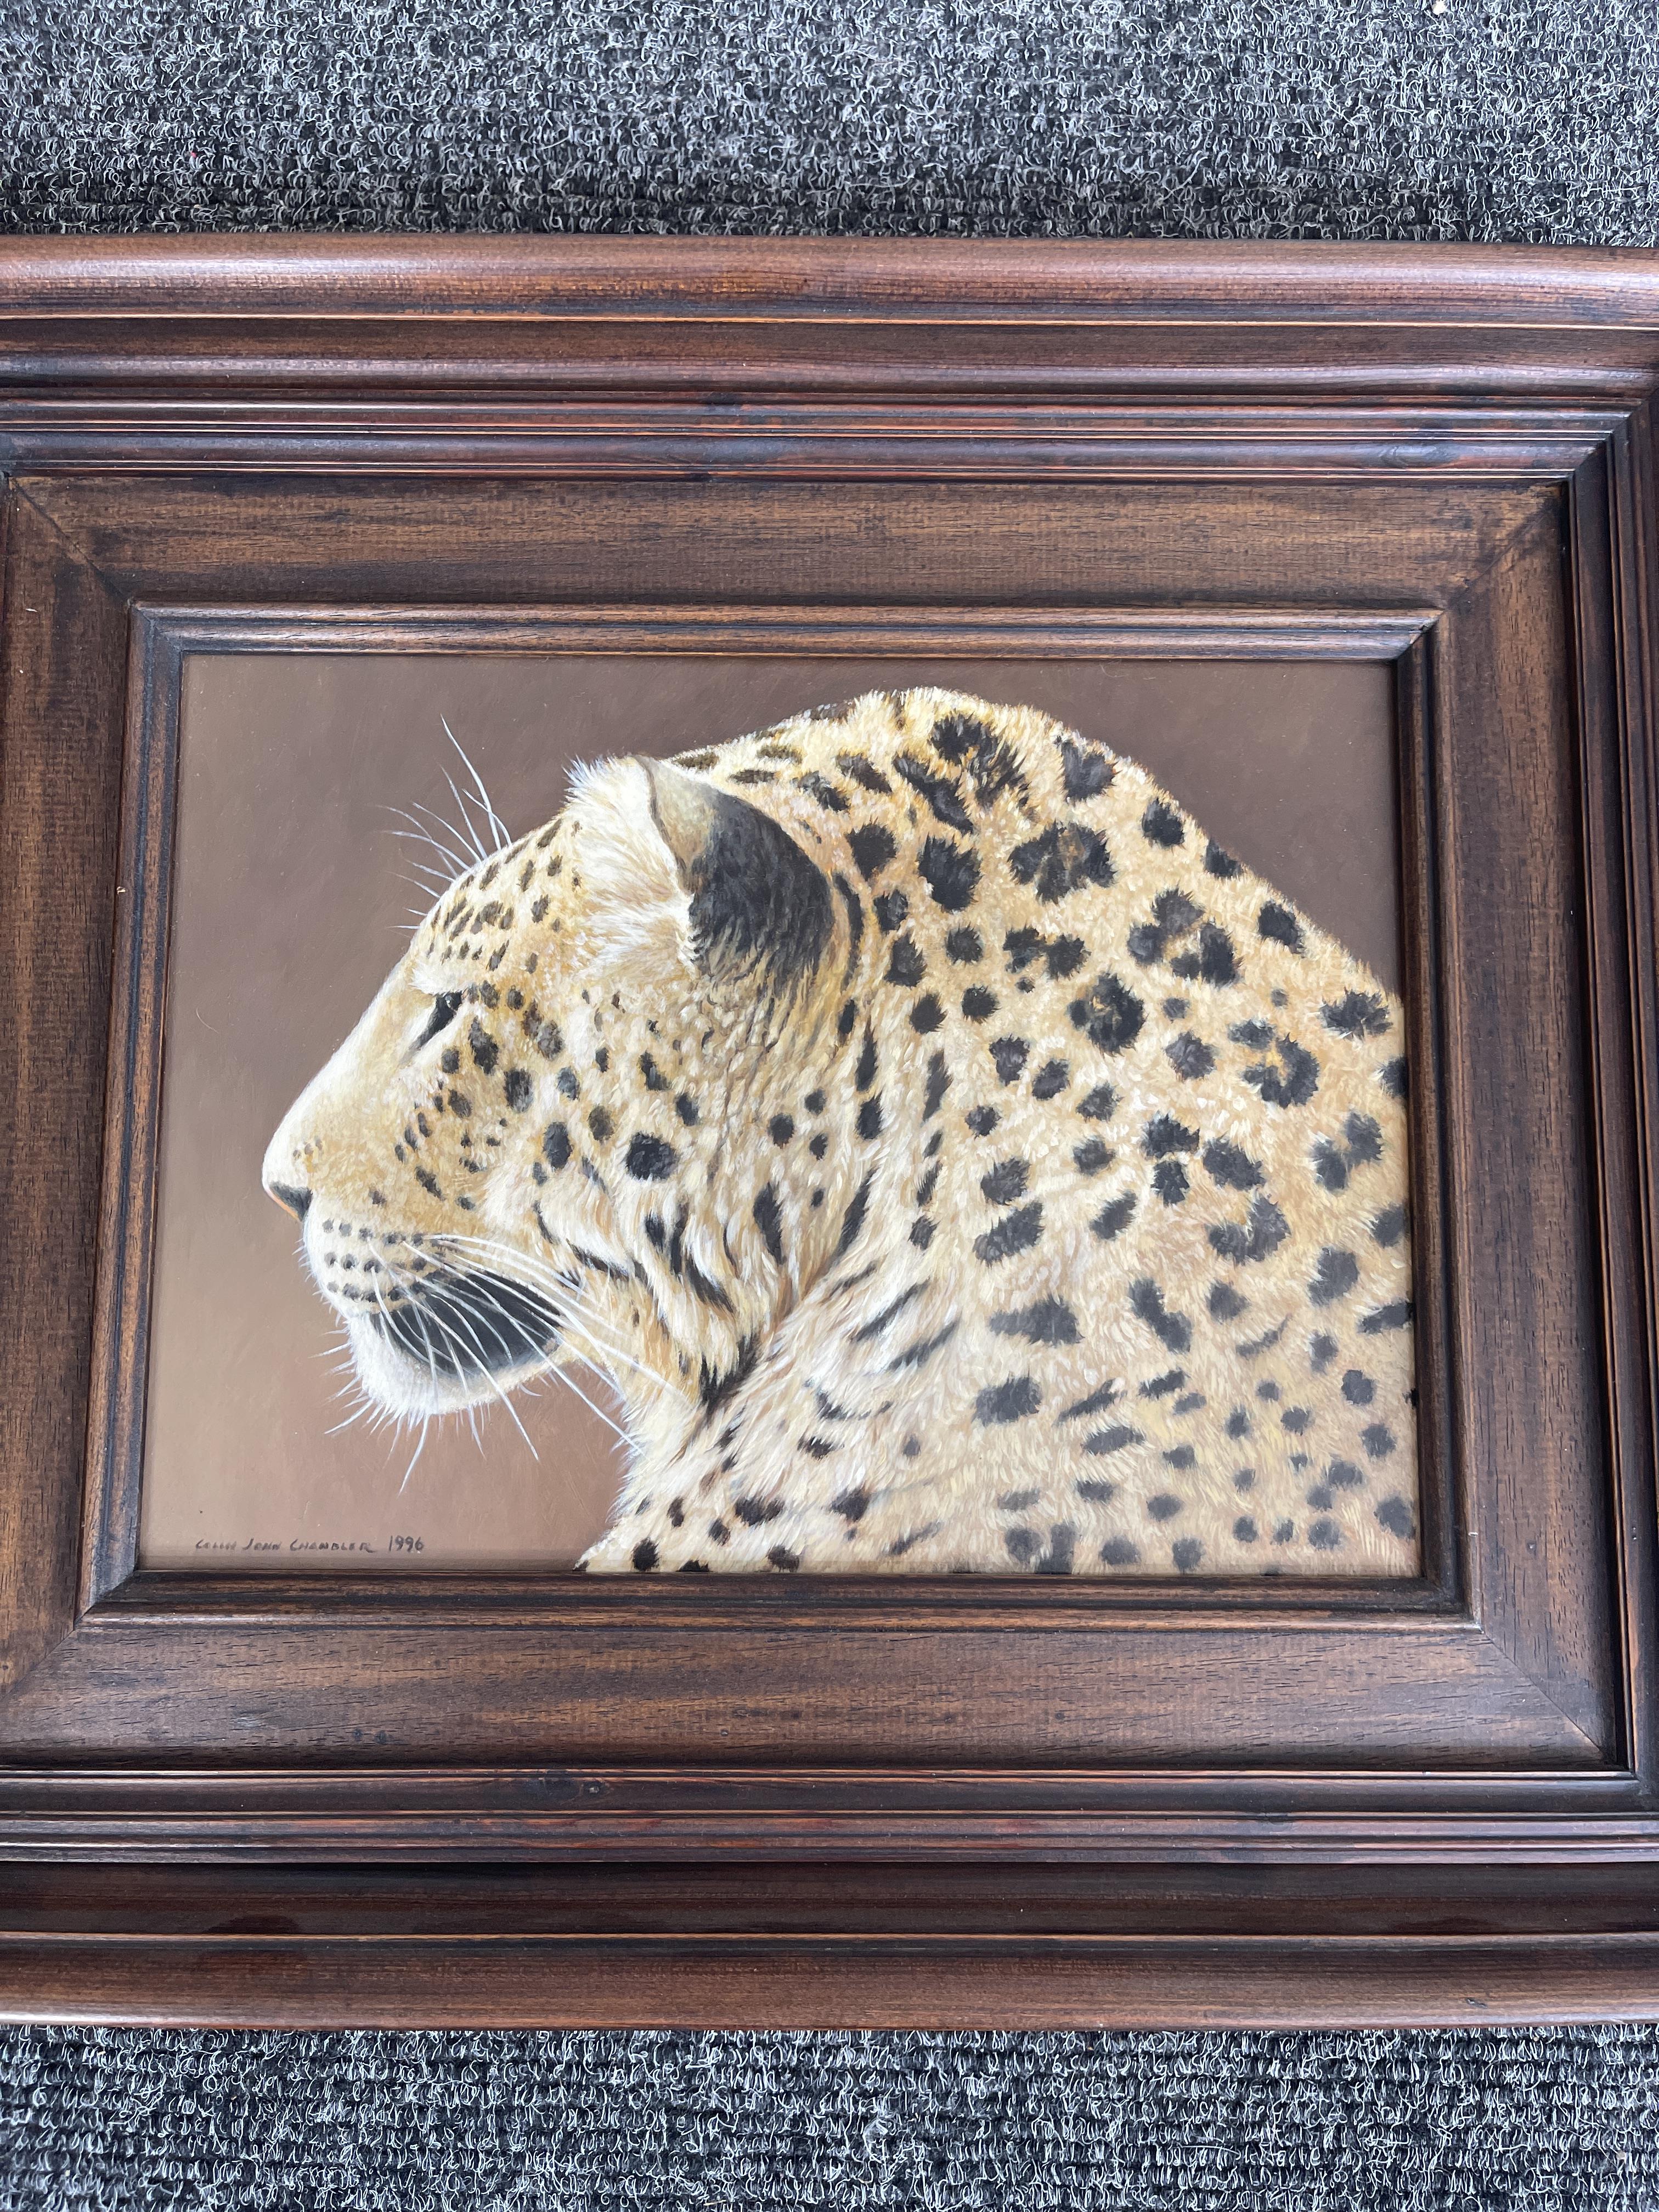 Signed and Framed Oil On Panel - Leopard - by Coli - Image 4 of 22